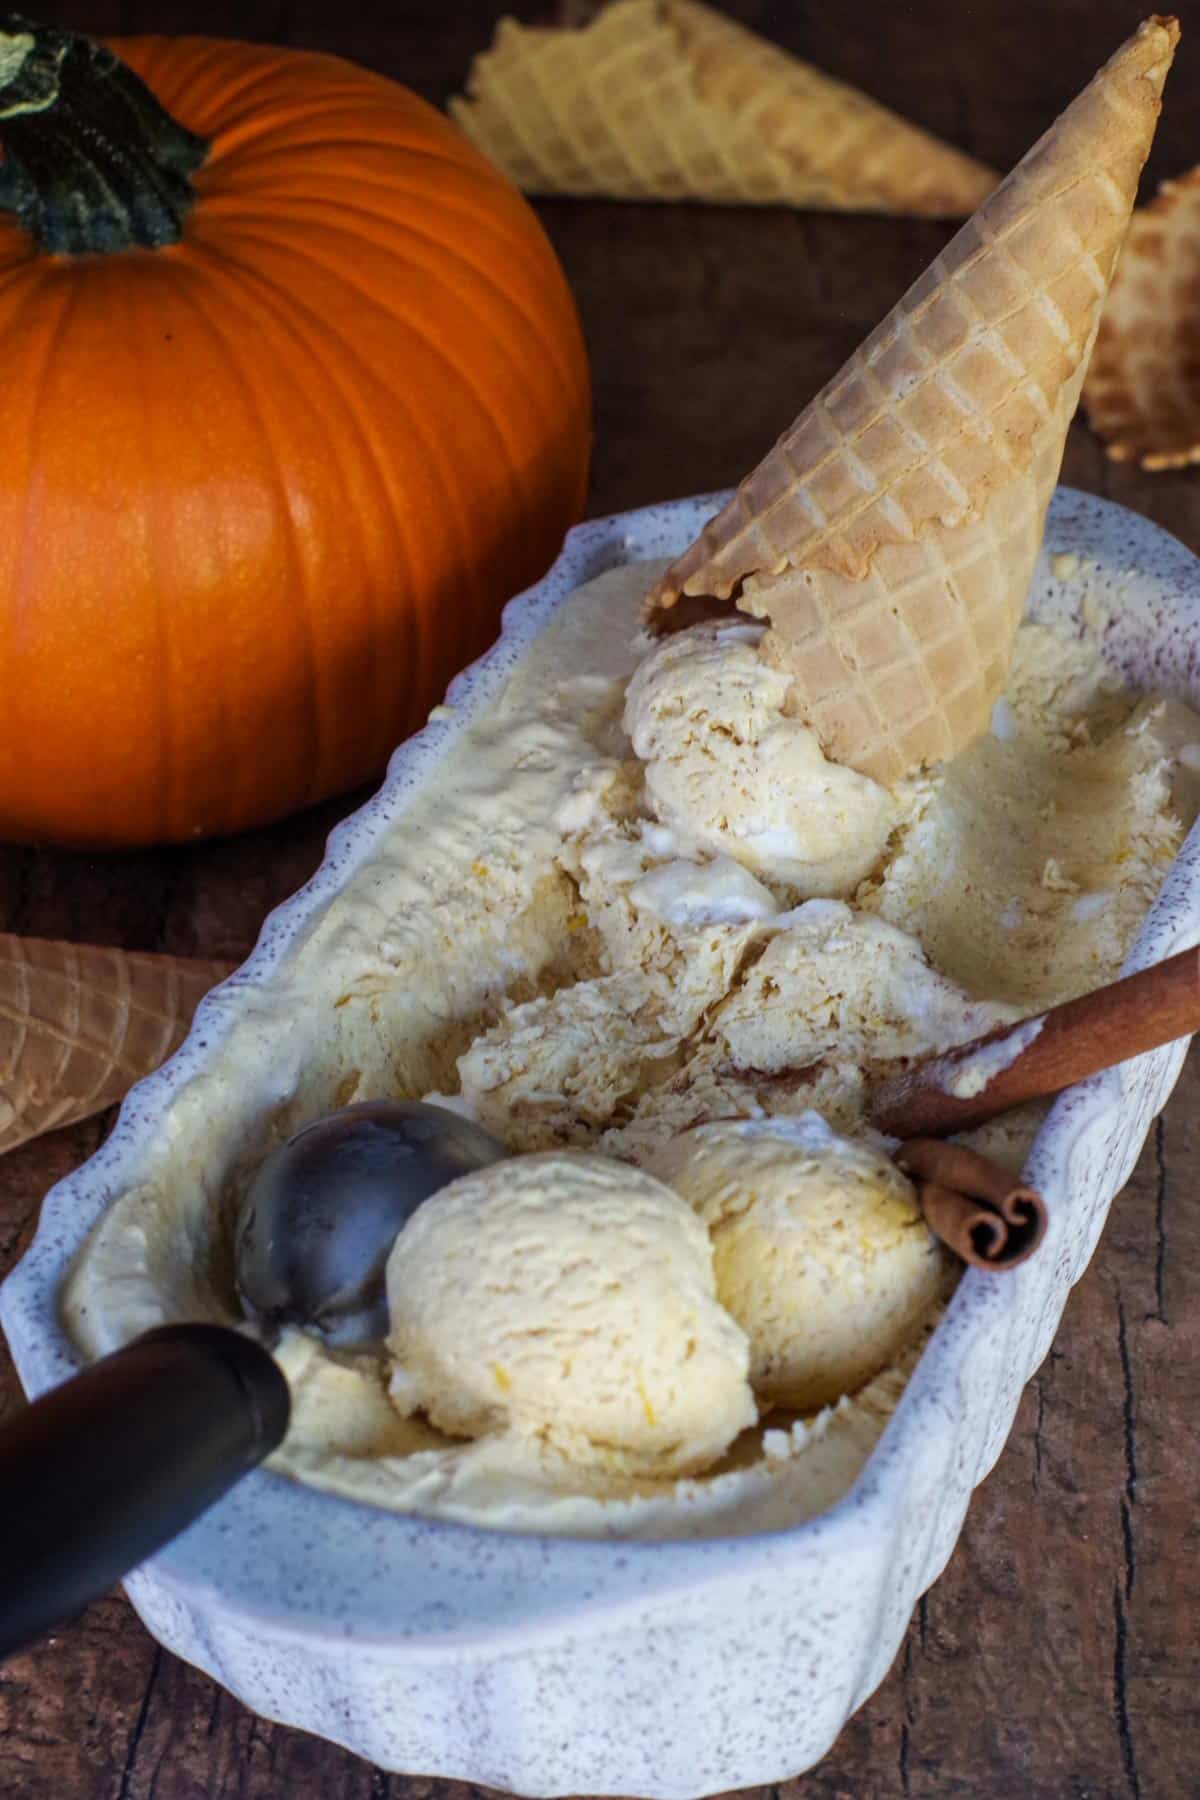 pumpkin ice cream in a beige loaf container with scooped ice cream balls, scoop, cinnamon sticks and a cone